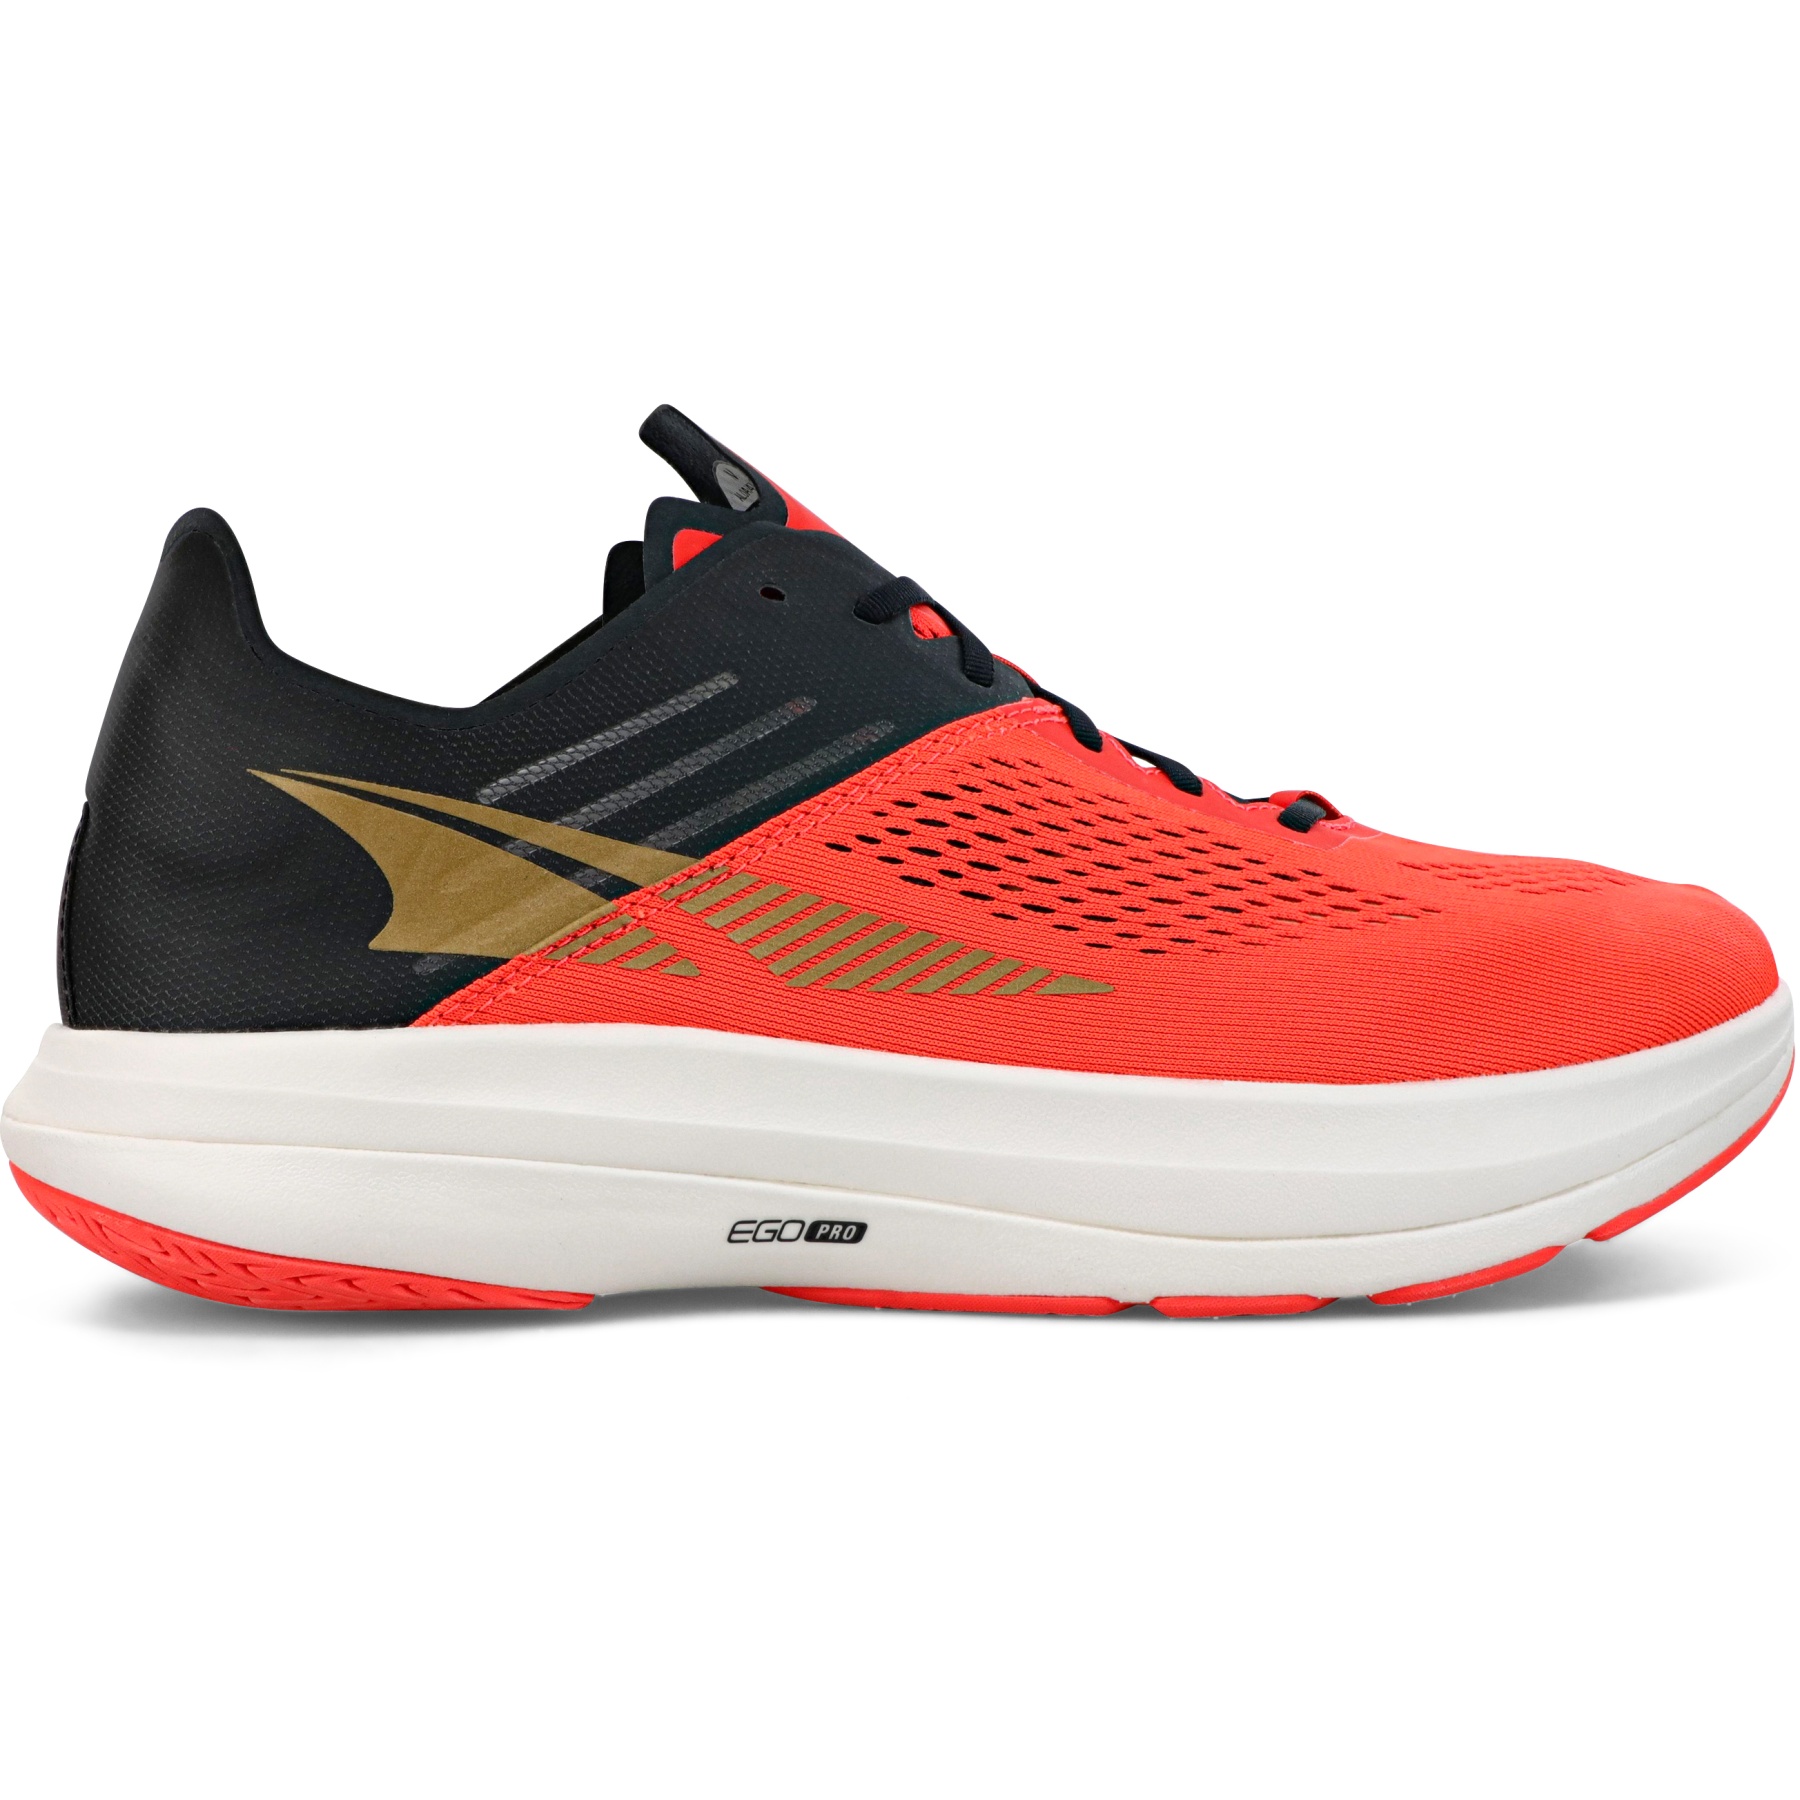 Image of Altra Vanish Carbon Running Shoes - Coral/Black